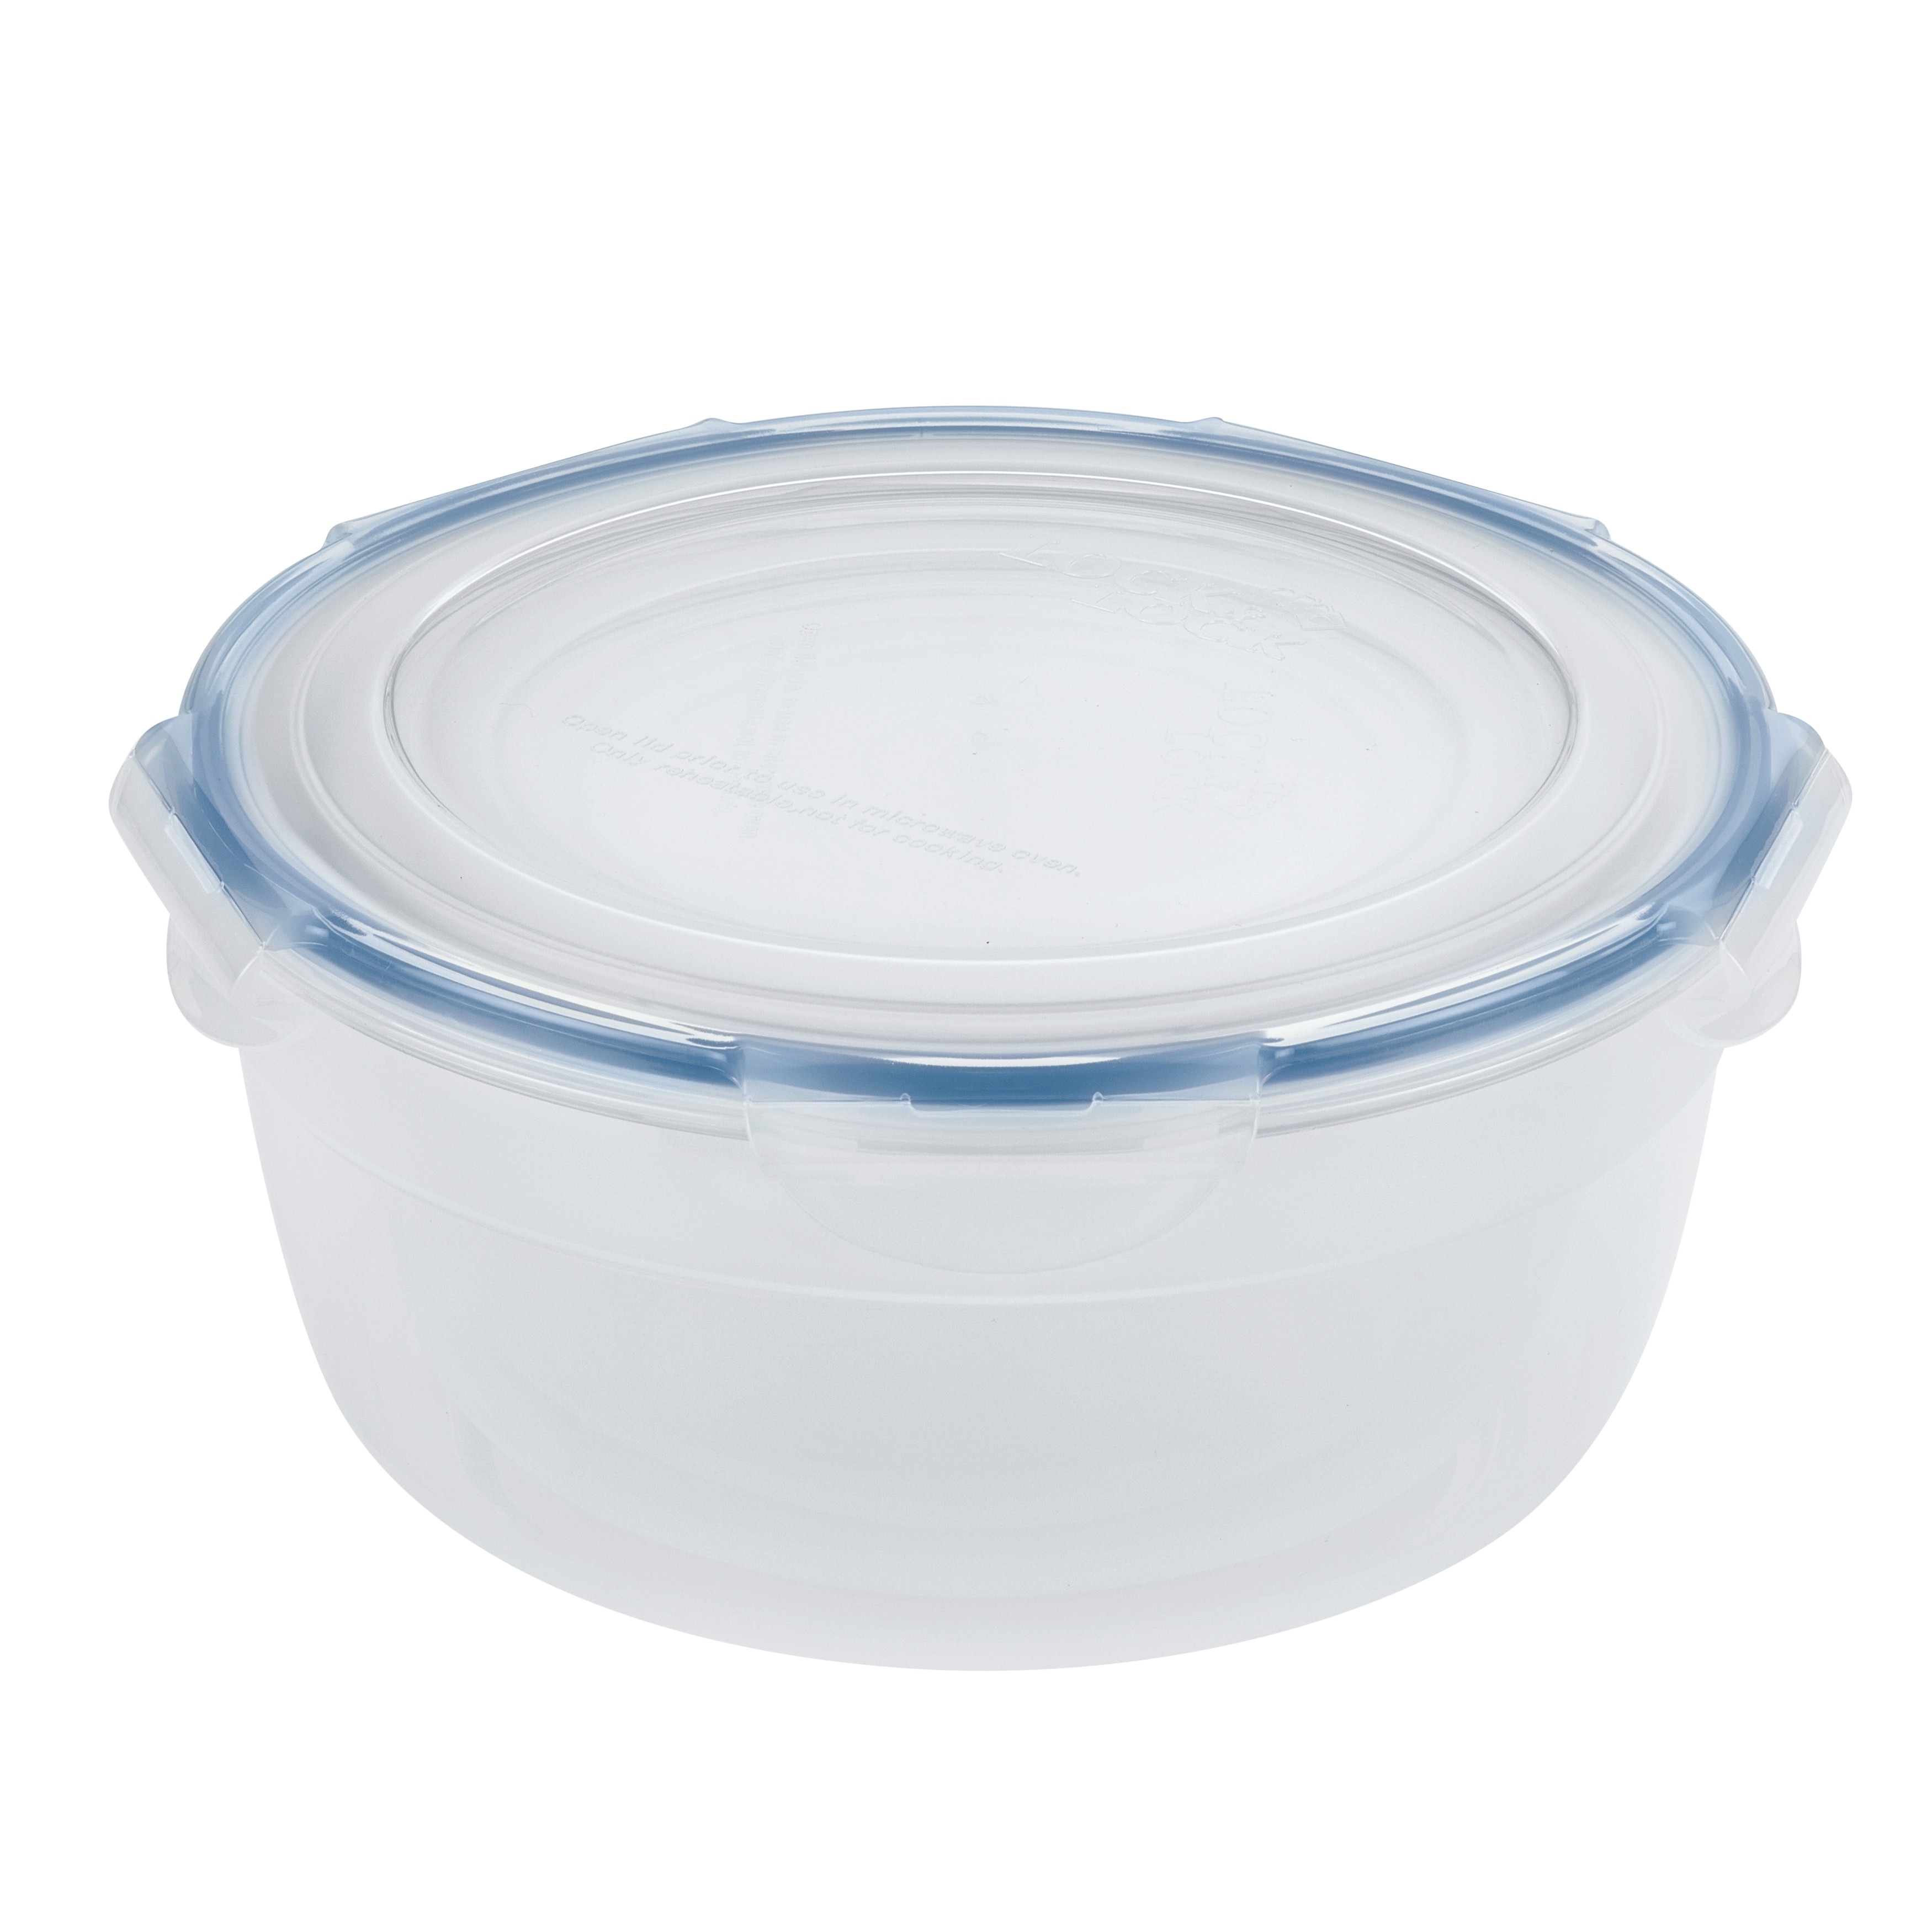 https://ak1.ostkcdn.com/images/products/is/images/direct/ea94a6da1aad9bfd295526f64b376f66cd362f54/Easy-Essentials-Specialty-Stackable-Bowls-Set%2C-6-Piece.jpg